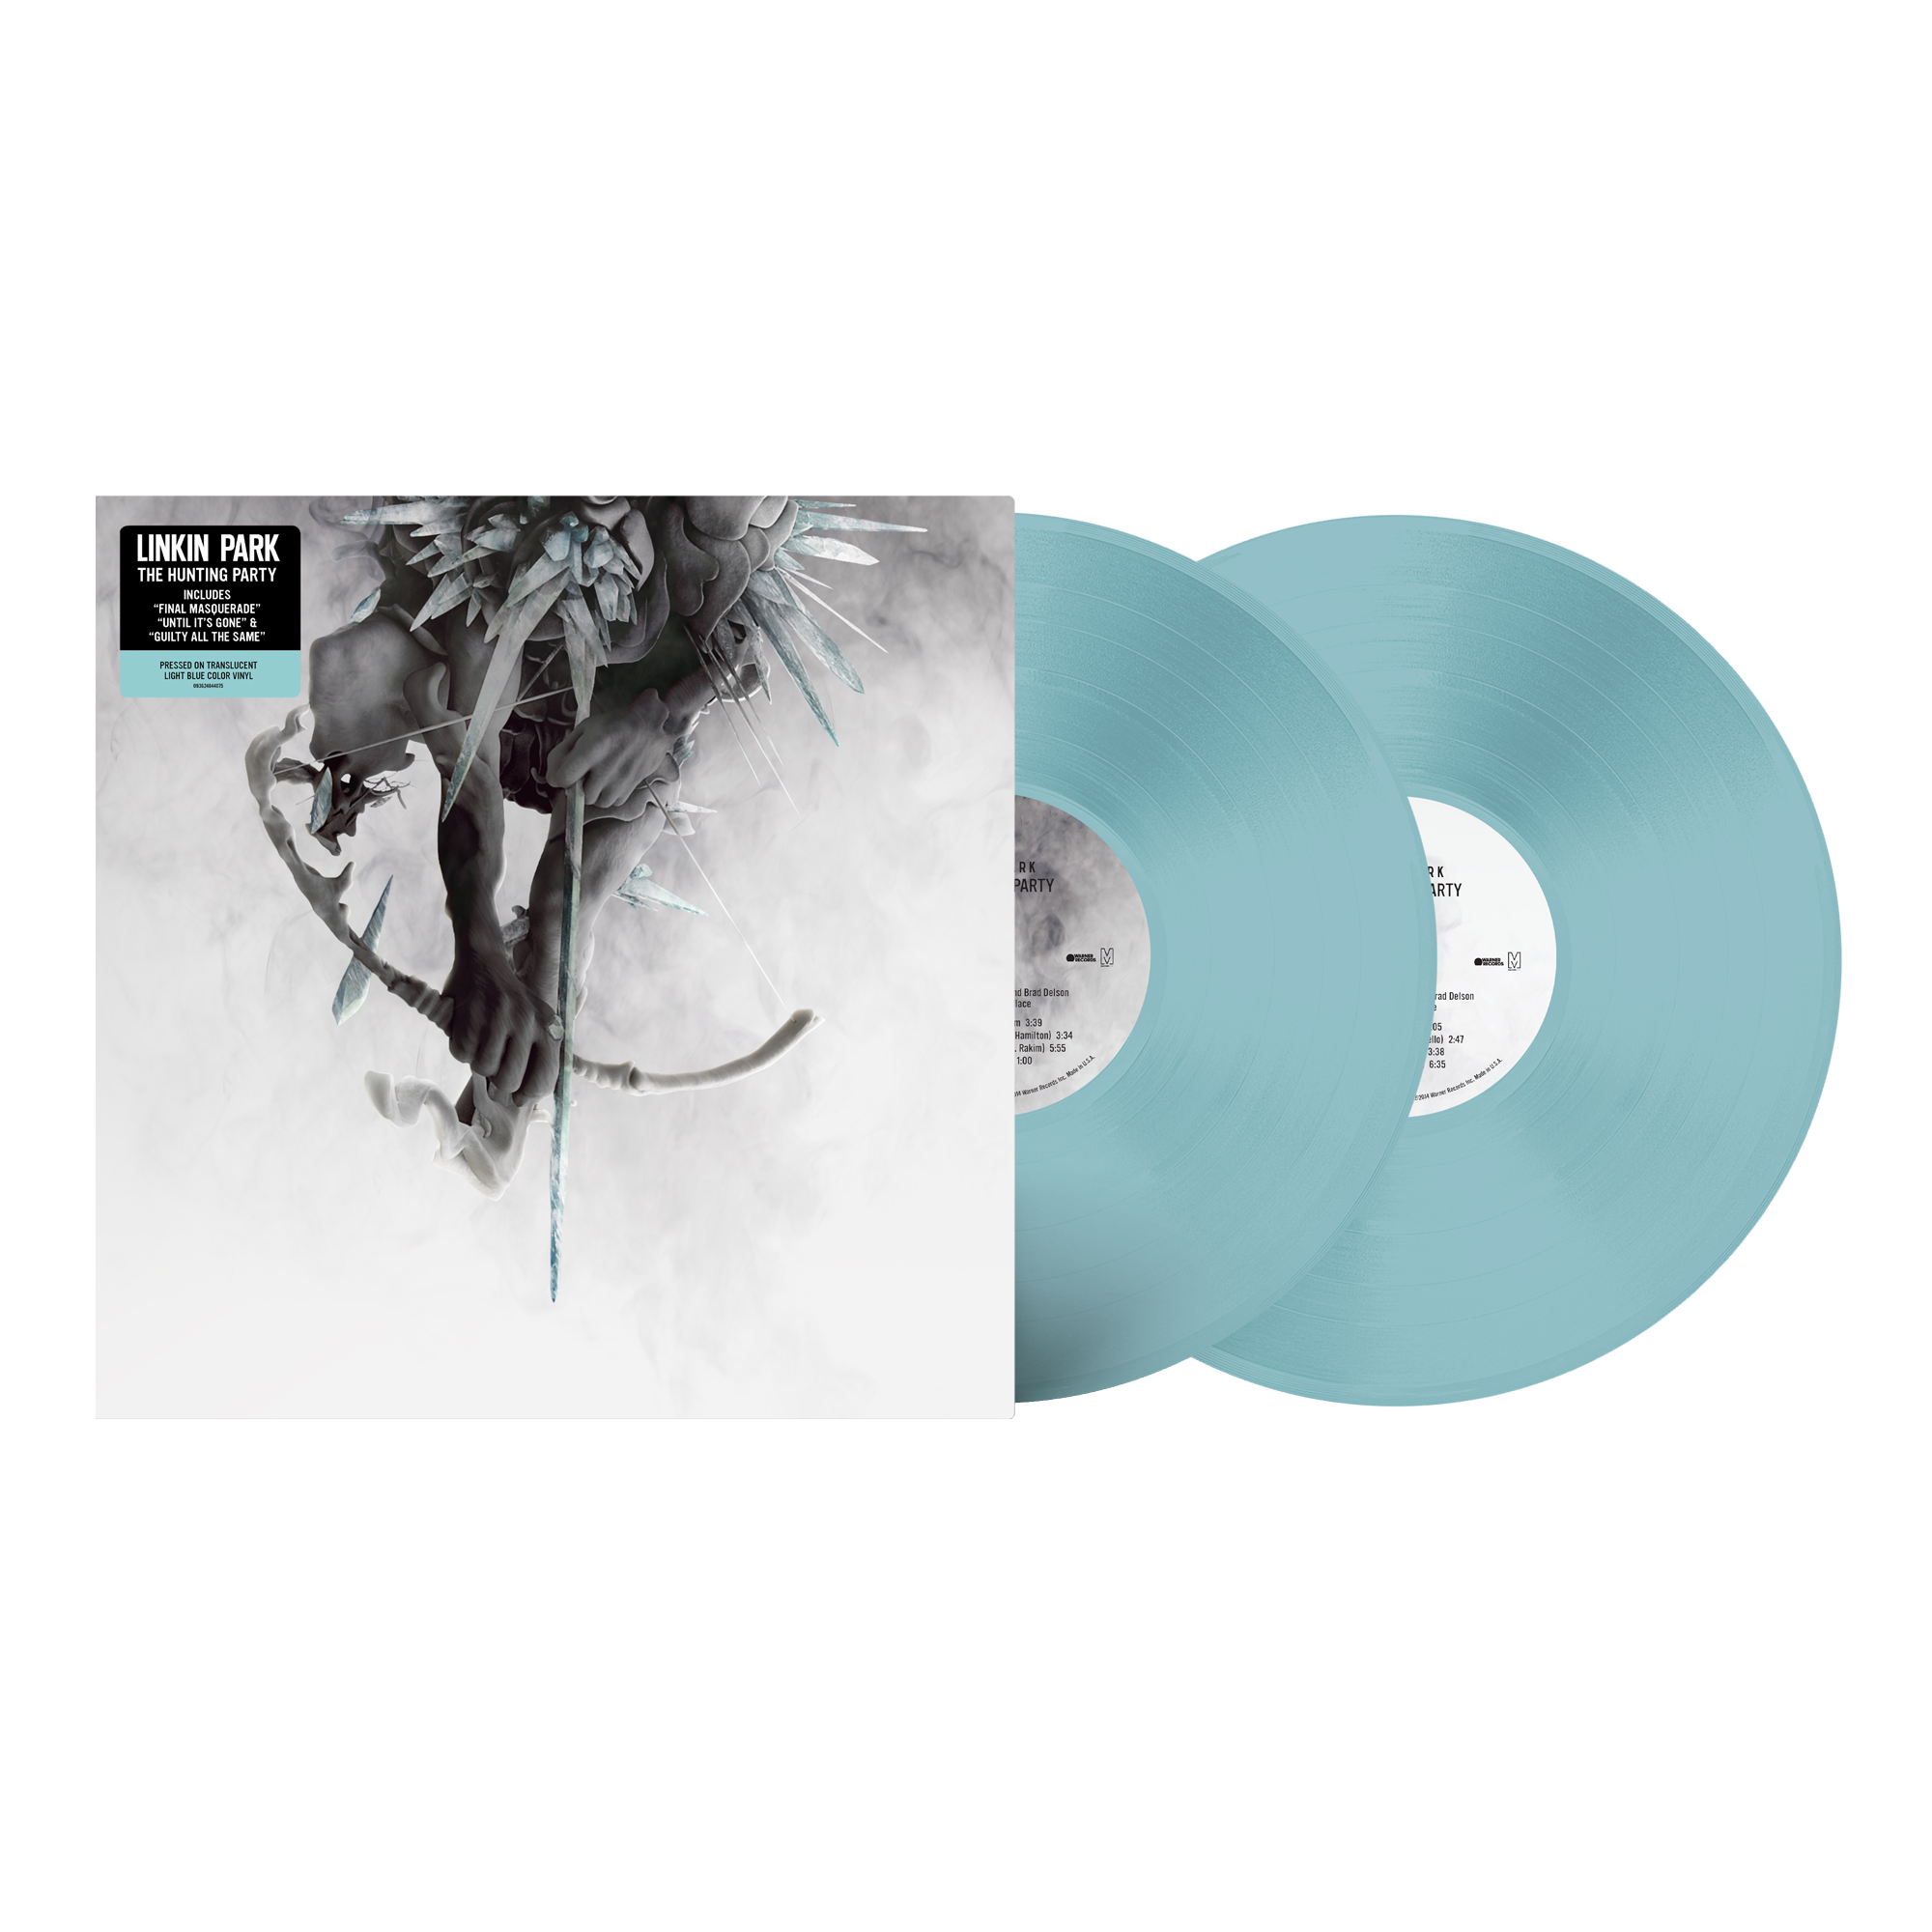 Linkin Park - The Hunting Party: Limited Translucent Blue Vinyl 2LP